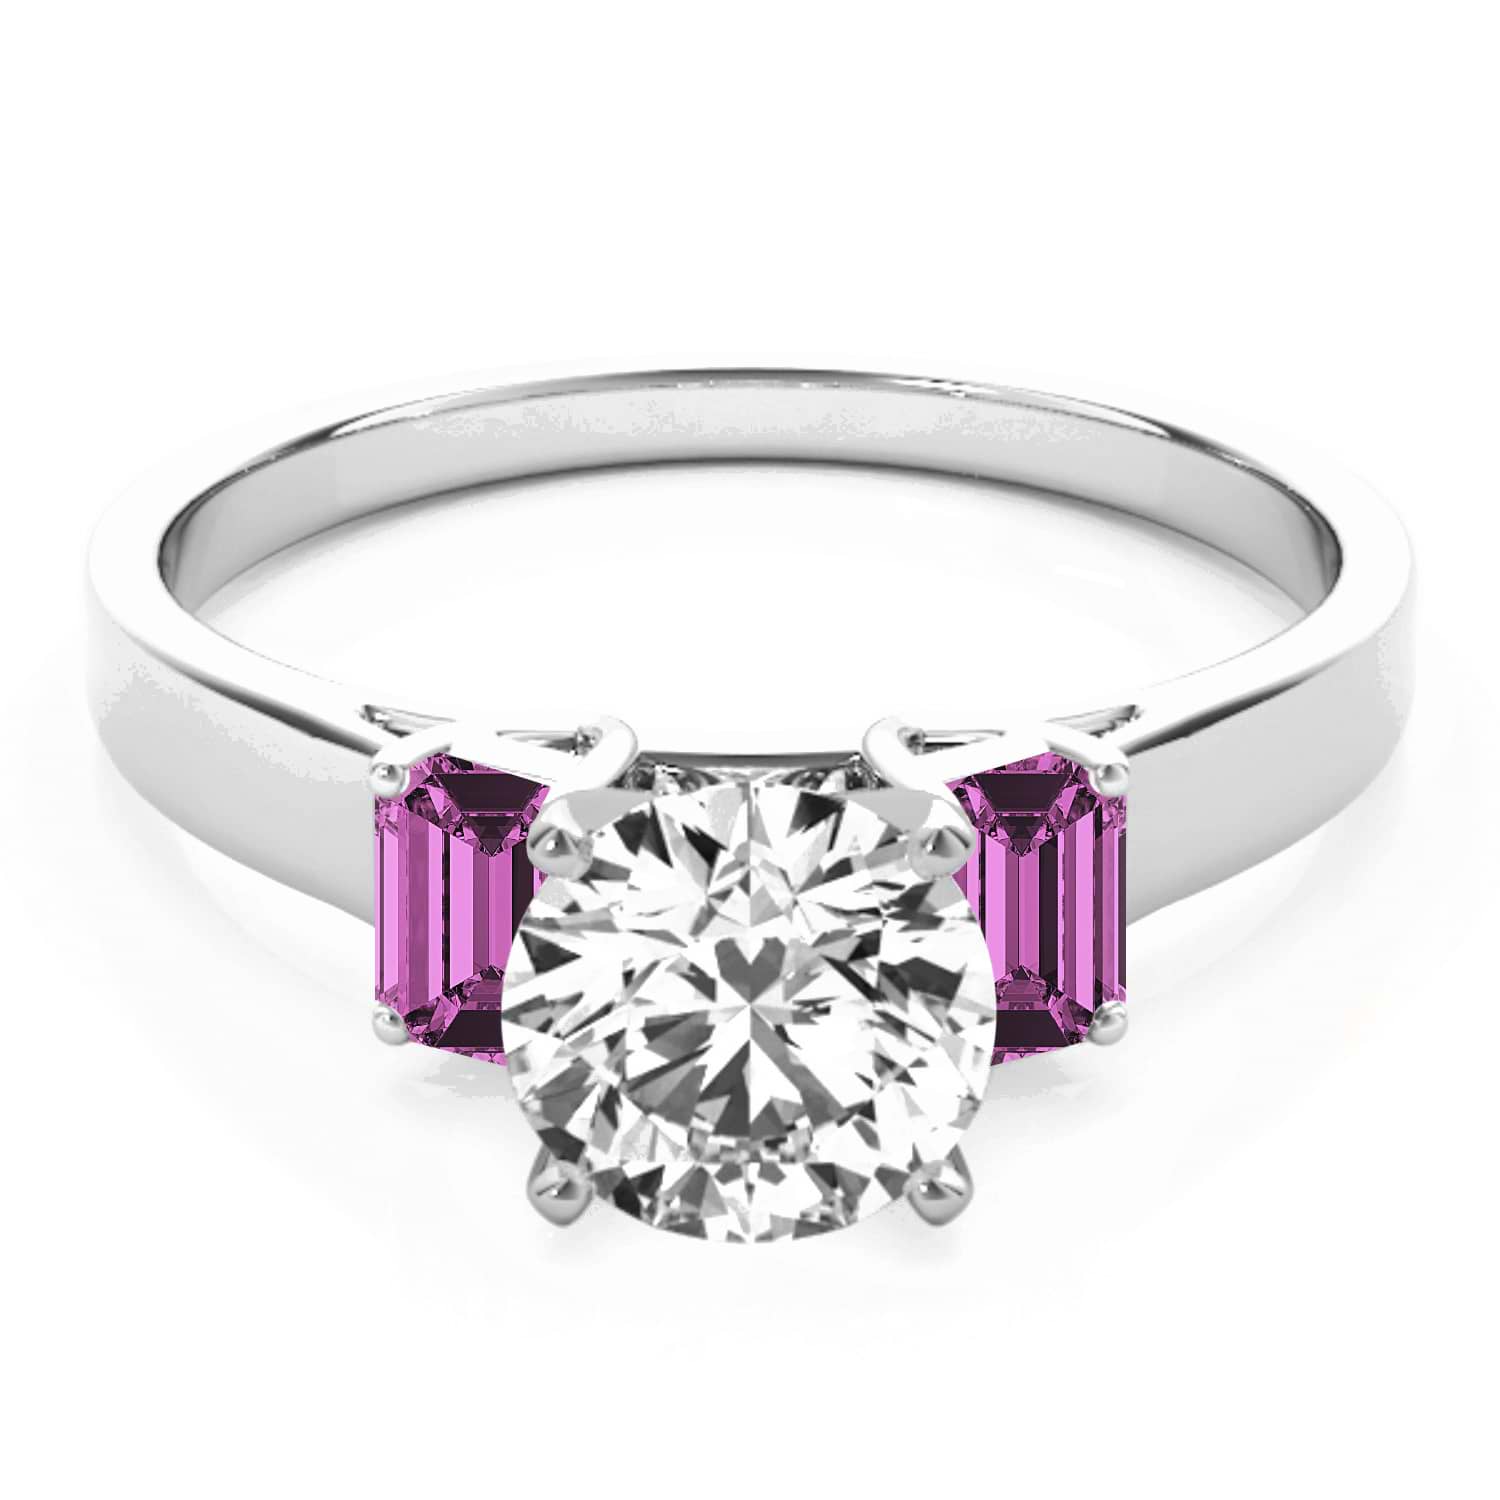 Trio Emerald Cut Pink Sapphire Engagement Ring 14k White Gold (0.30ct)